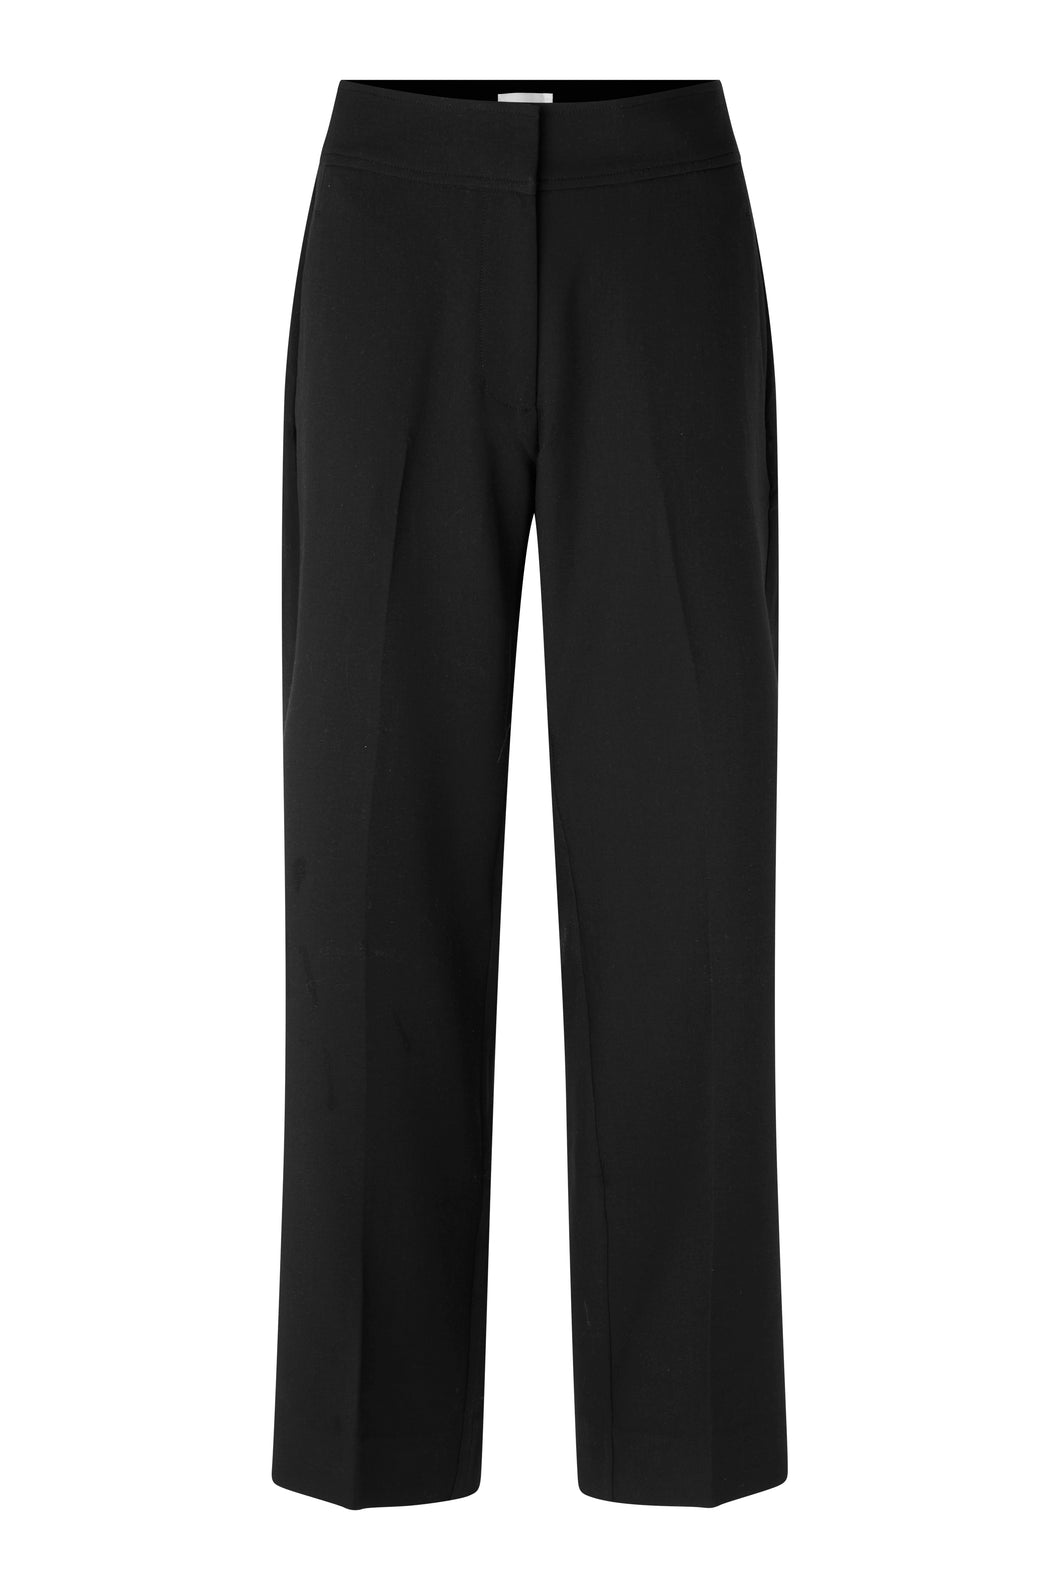 SECOND FEMALE EVIE CLASSIS TROUSERS BLACK - S. LABELS